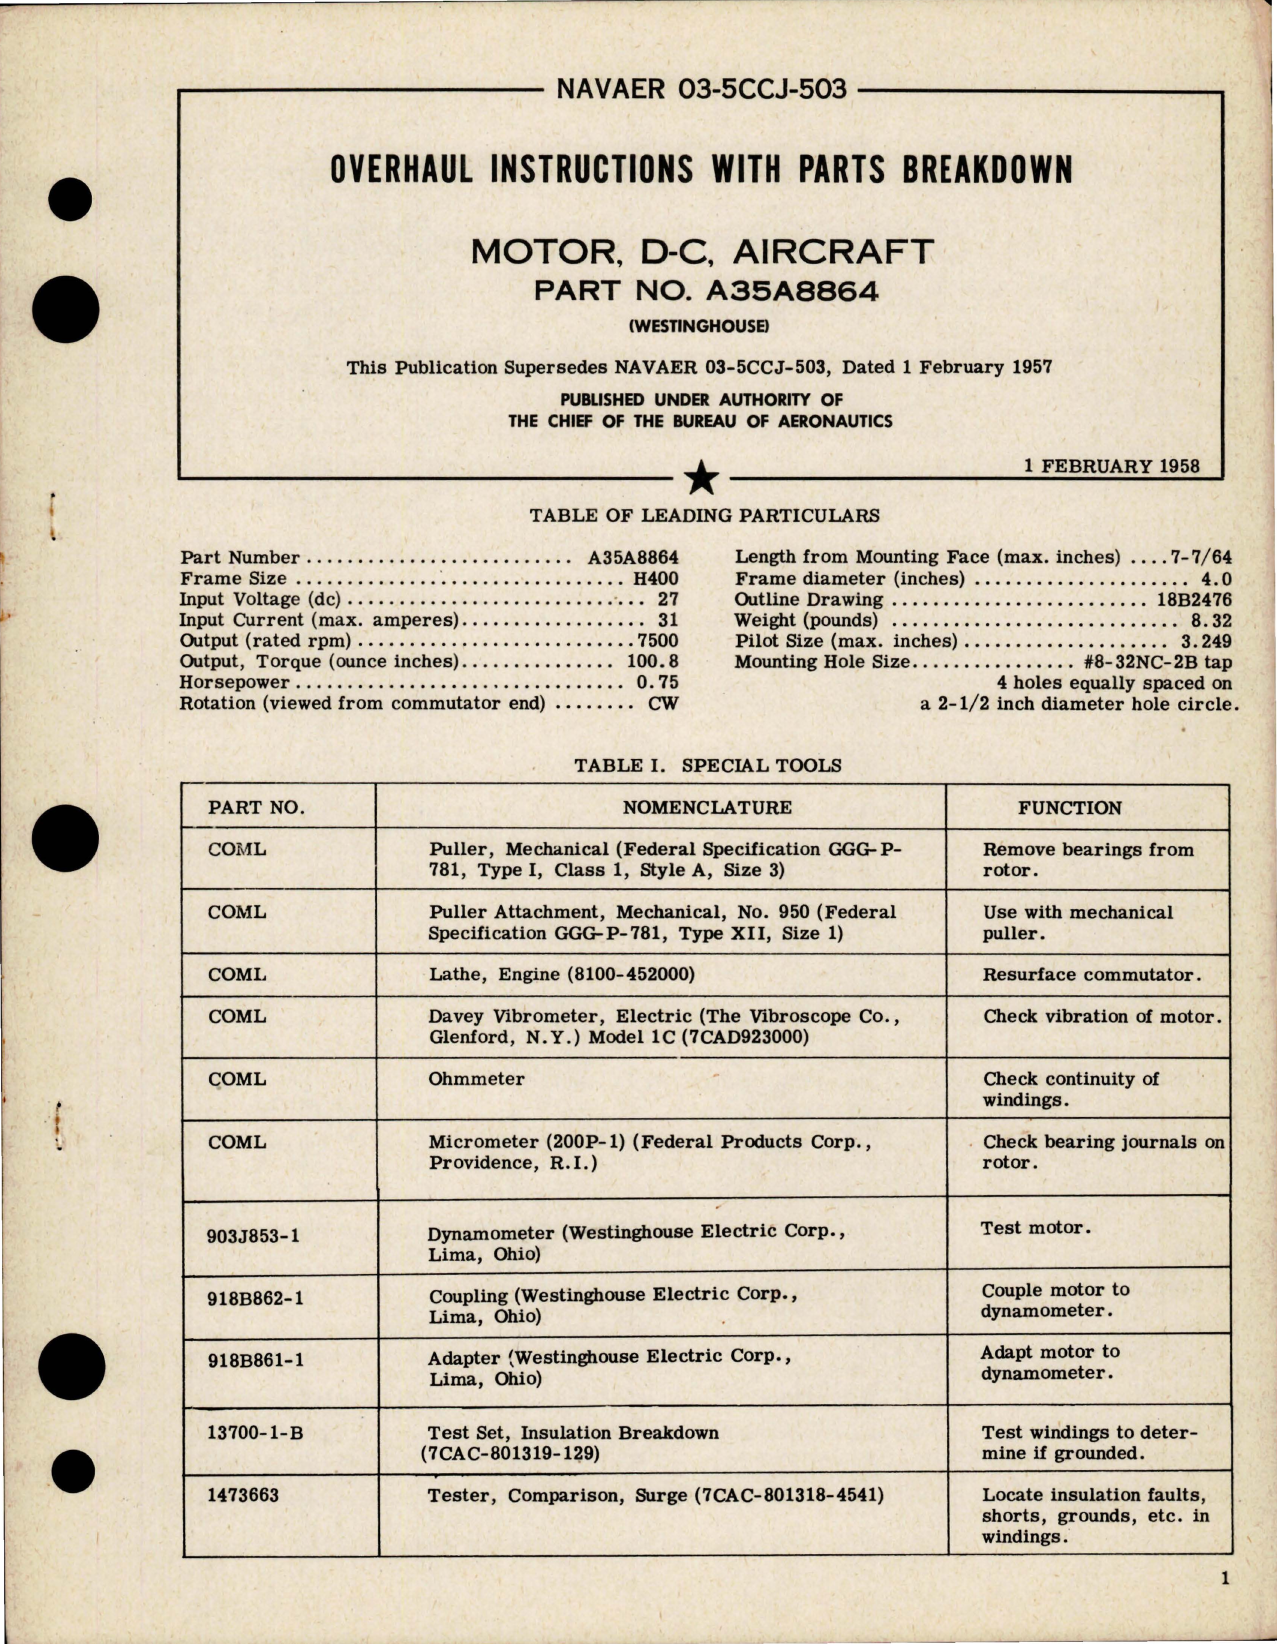 Sample page 1 from AirCorps Library document: Overhaul Instructions with Parts Breakdown for DC Aircraft Motor - Part A35A8864 